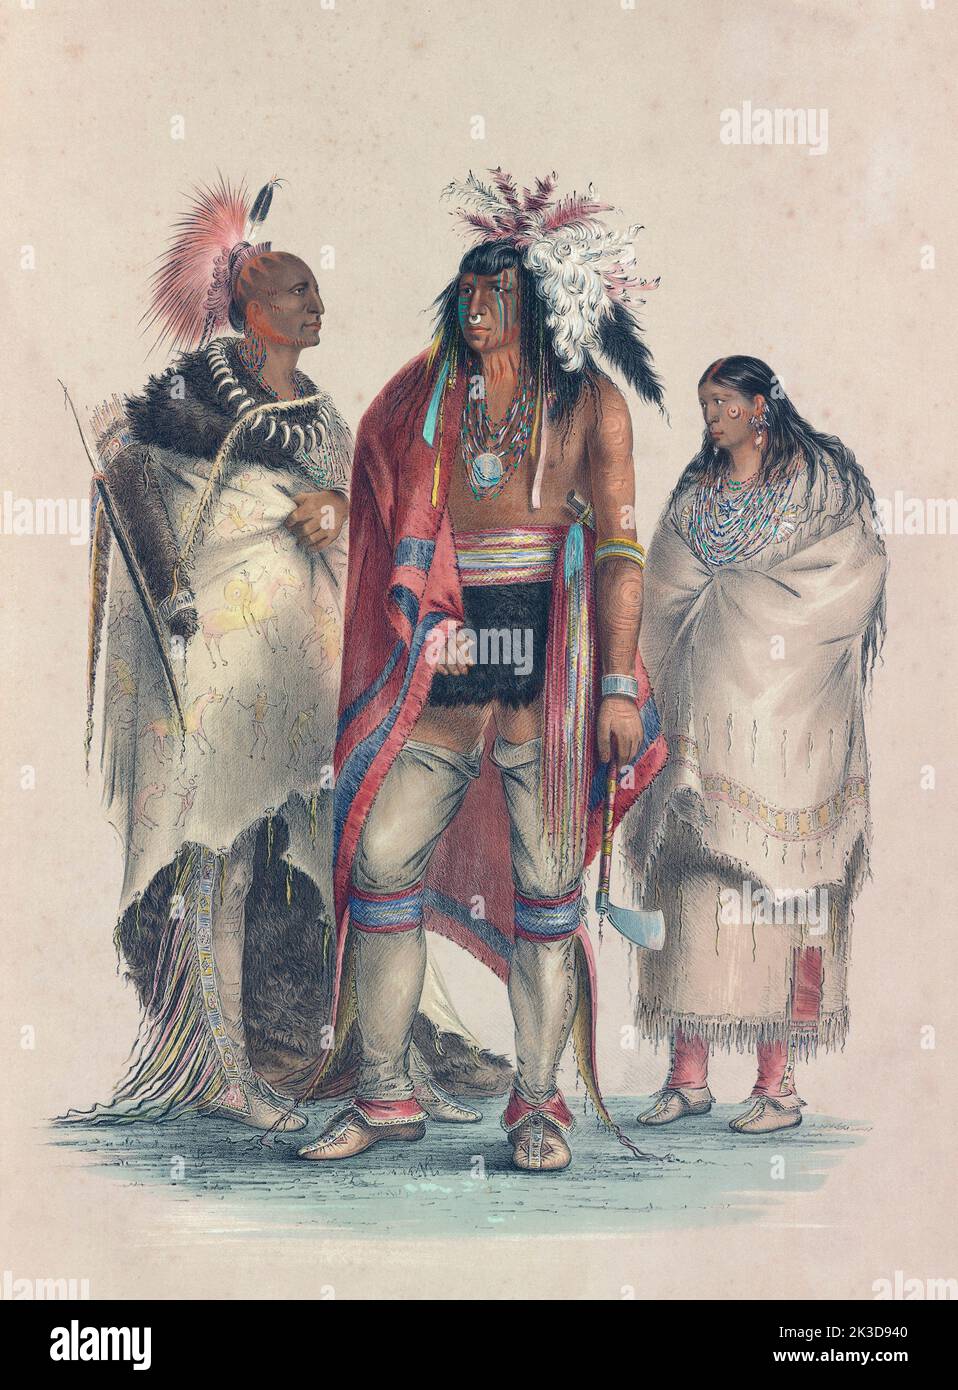 North American Indians.  From left to right: Osage warrior; Iroquois warrior, Pawnee woman.  From Catlin's North American Indian Portfolio, published in London 1844 by the artist, American adventurer George Catlin, 1796 - 1872.  During many journeys Catlin recorded with pen and brush the customs and life-styles of Native American tribes. Stock Photo